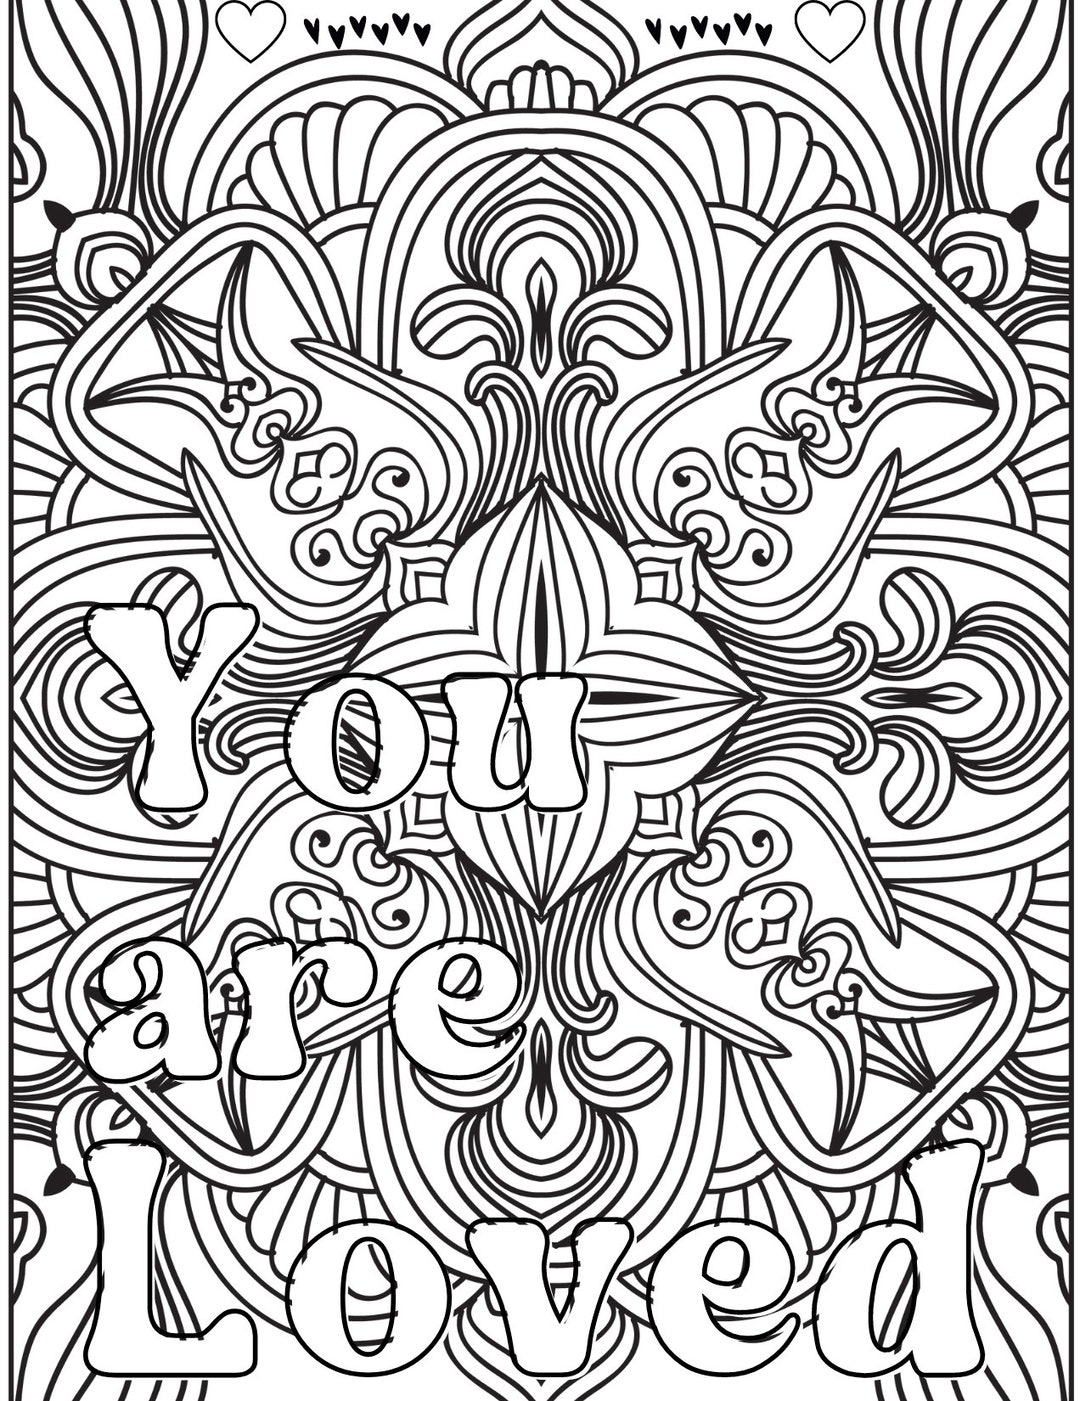 Printable You Are Loved Coloring Page - Etsy